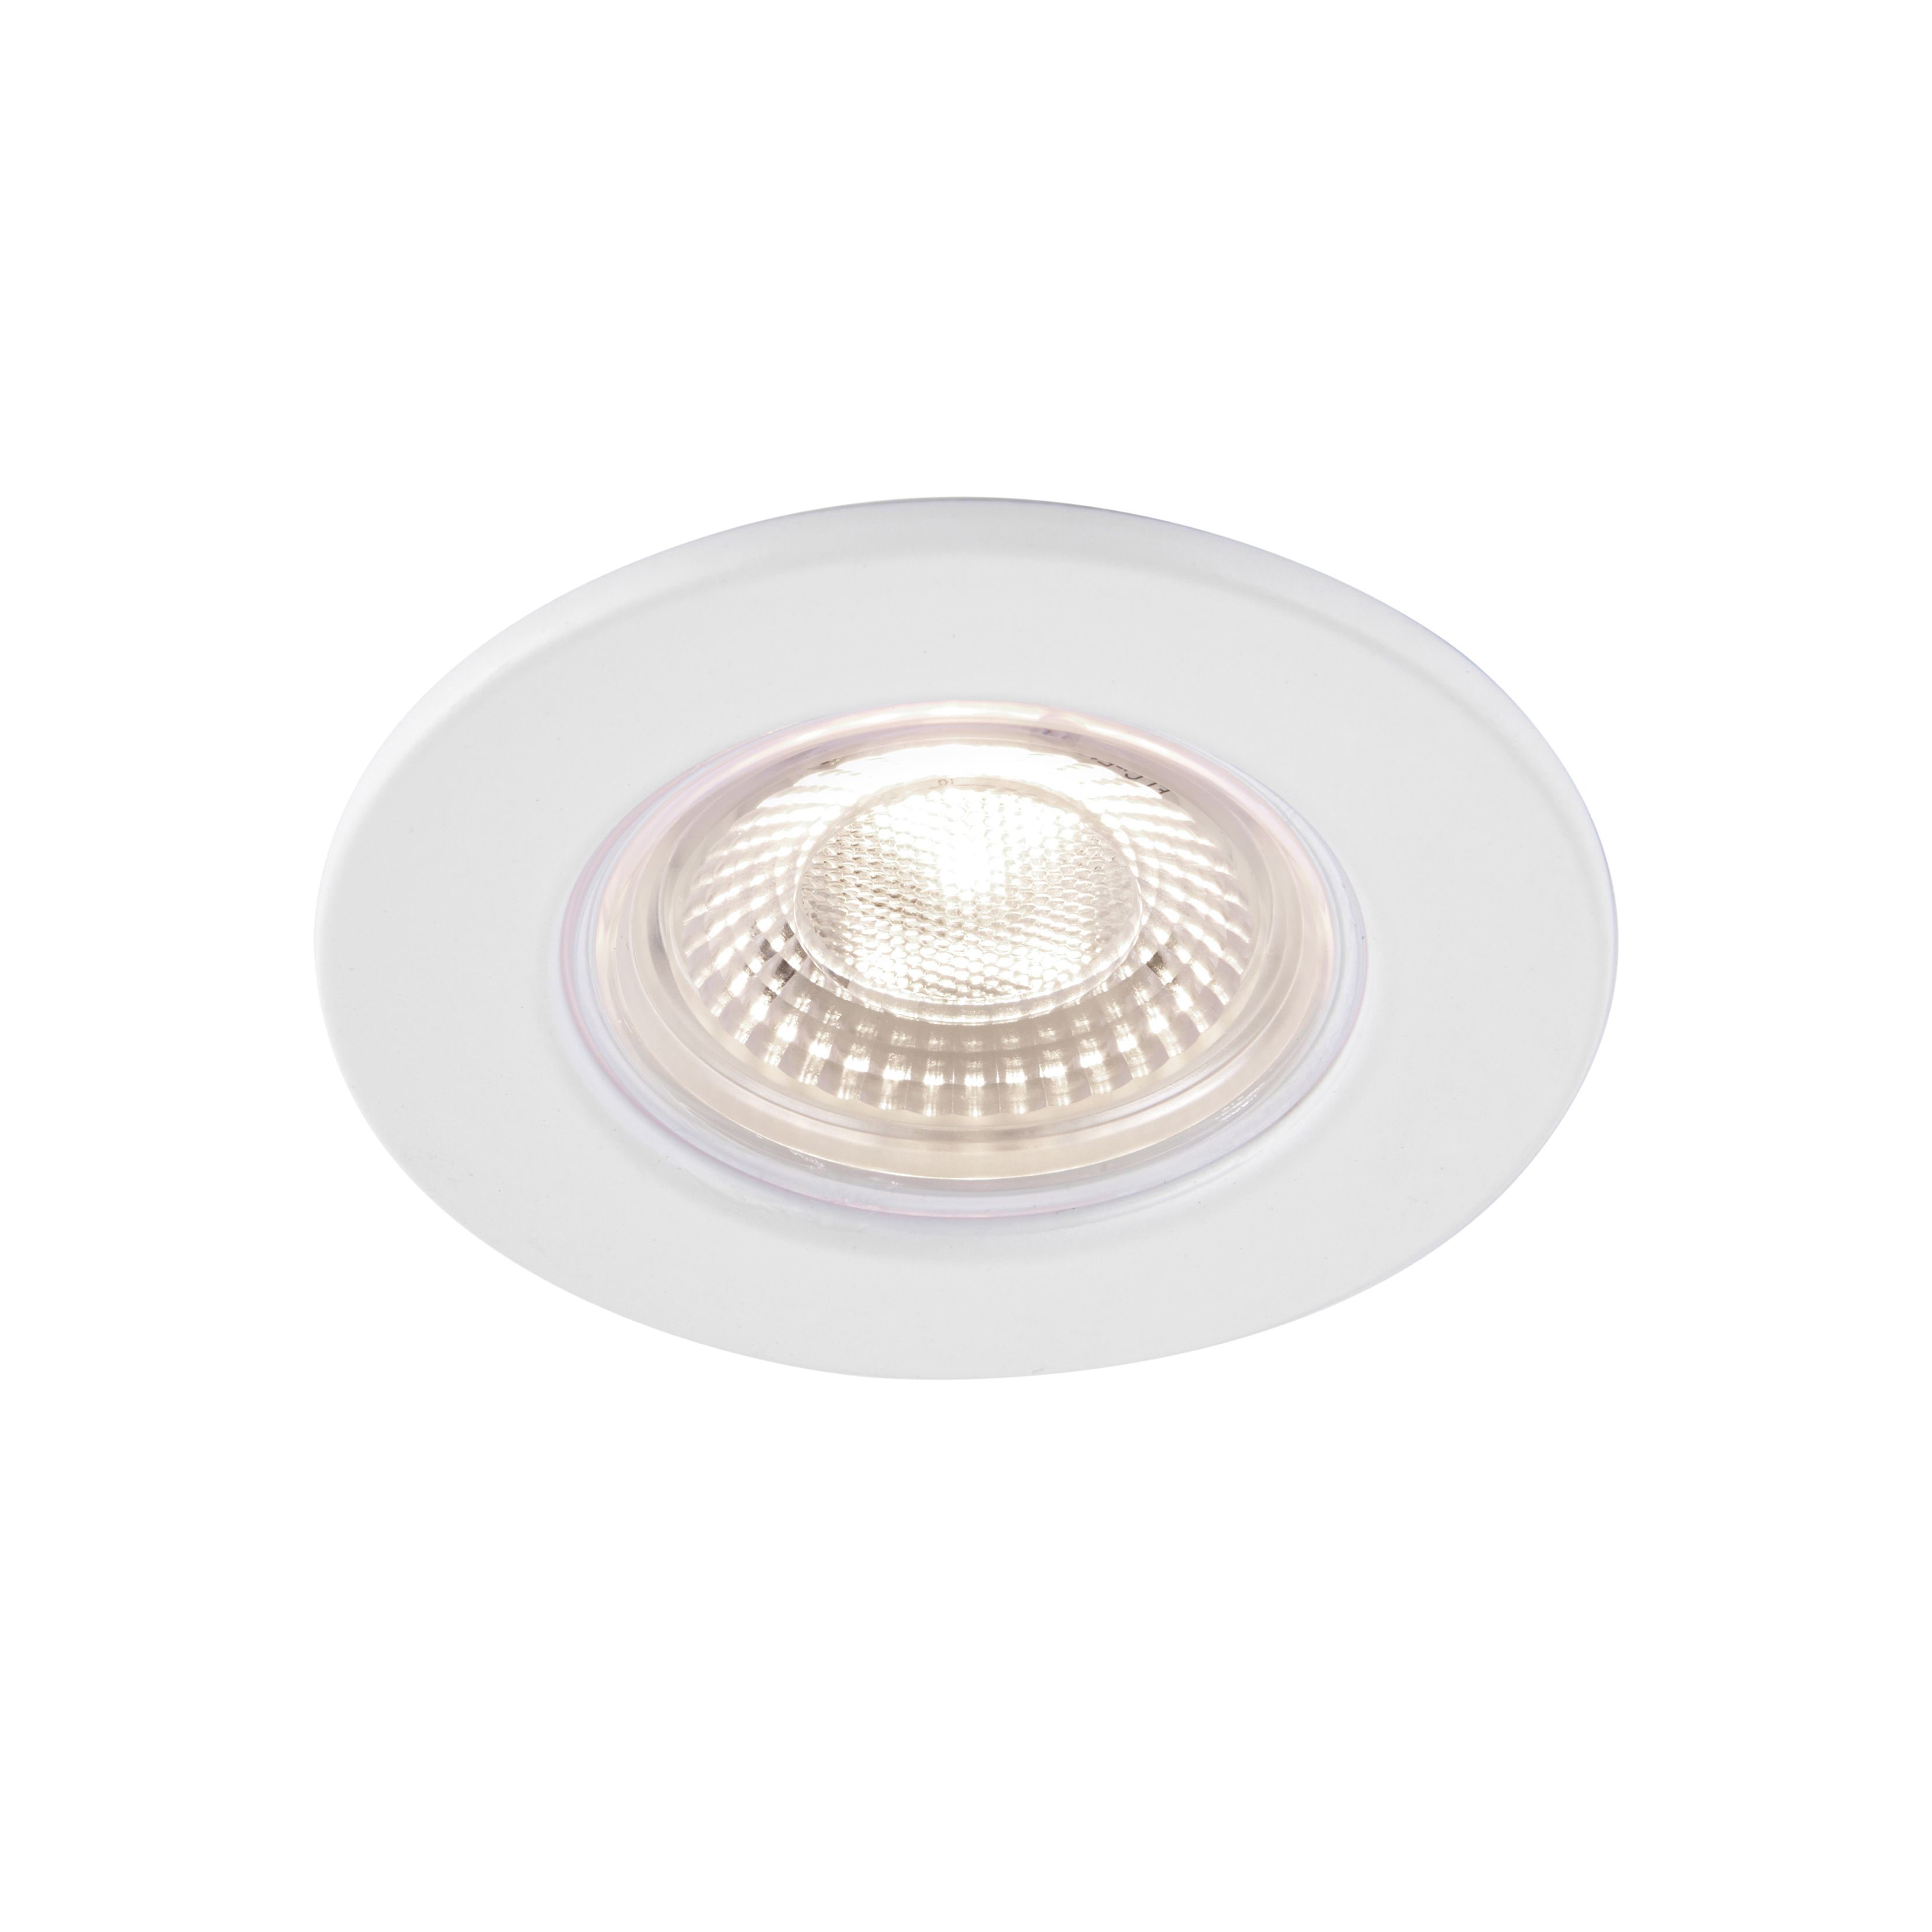 GuardECO White Non-adjustable LED Cool white Downlight 6W IP65, Pack of 10